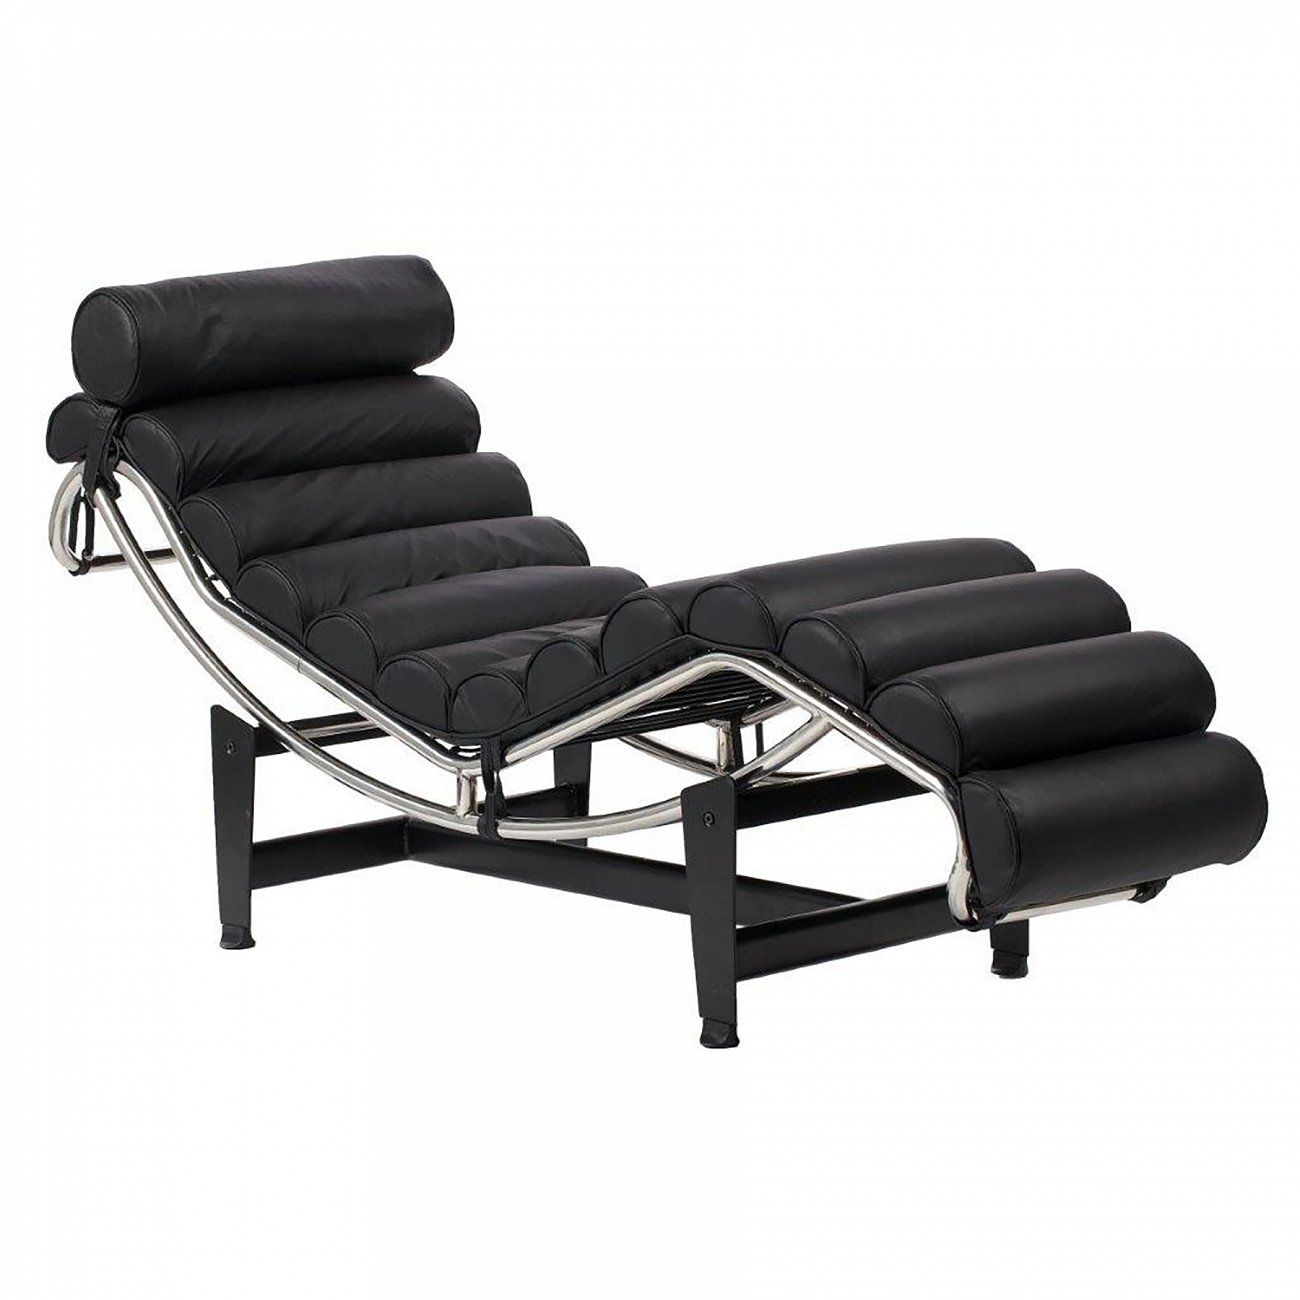 Black leather couch with bolsters